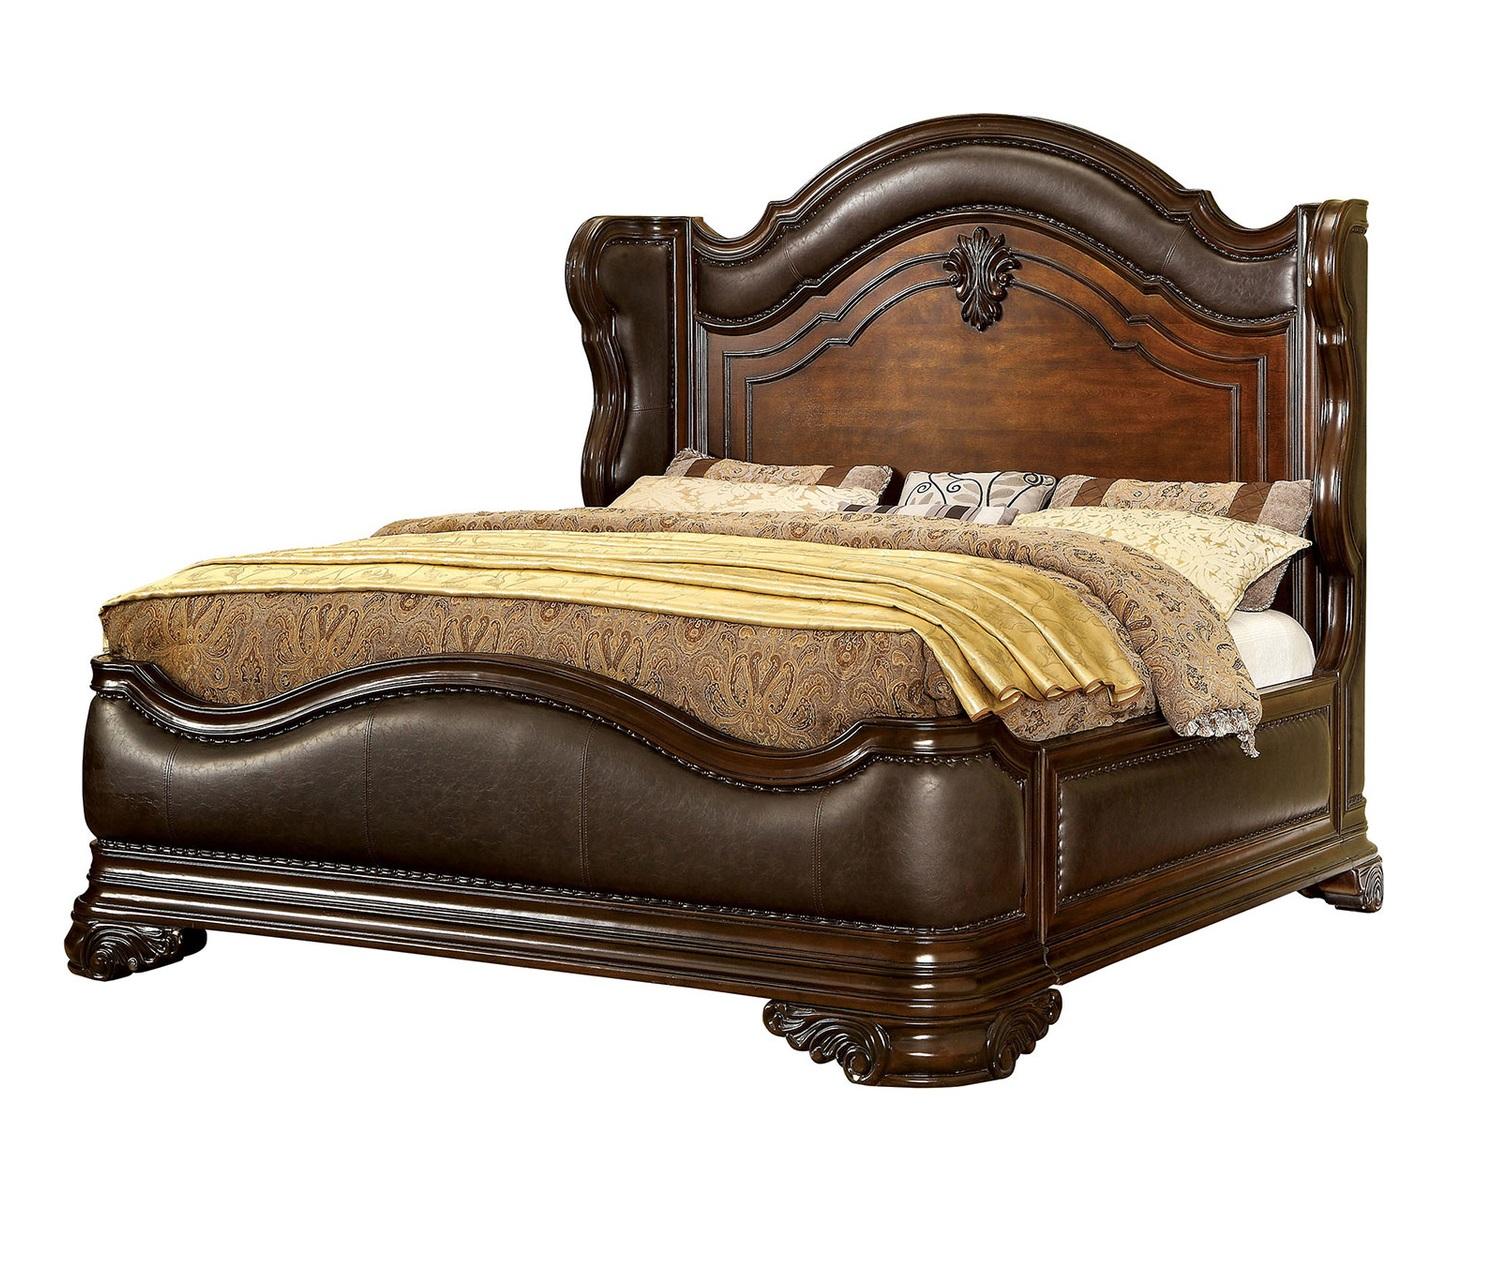 

    
Traditional Brown Cherry Solid Wood Queen Bedroom Set 5pcs Furniture of America CM7859 Arcturus
